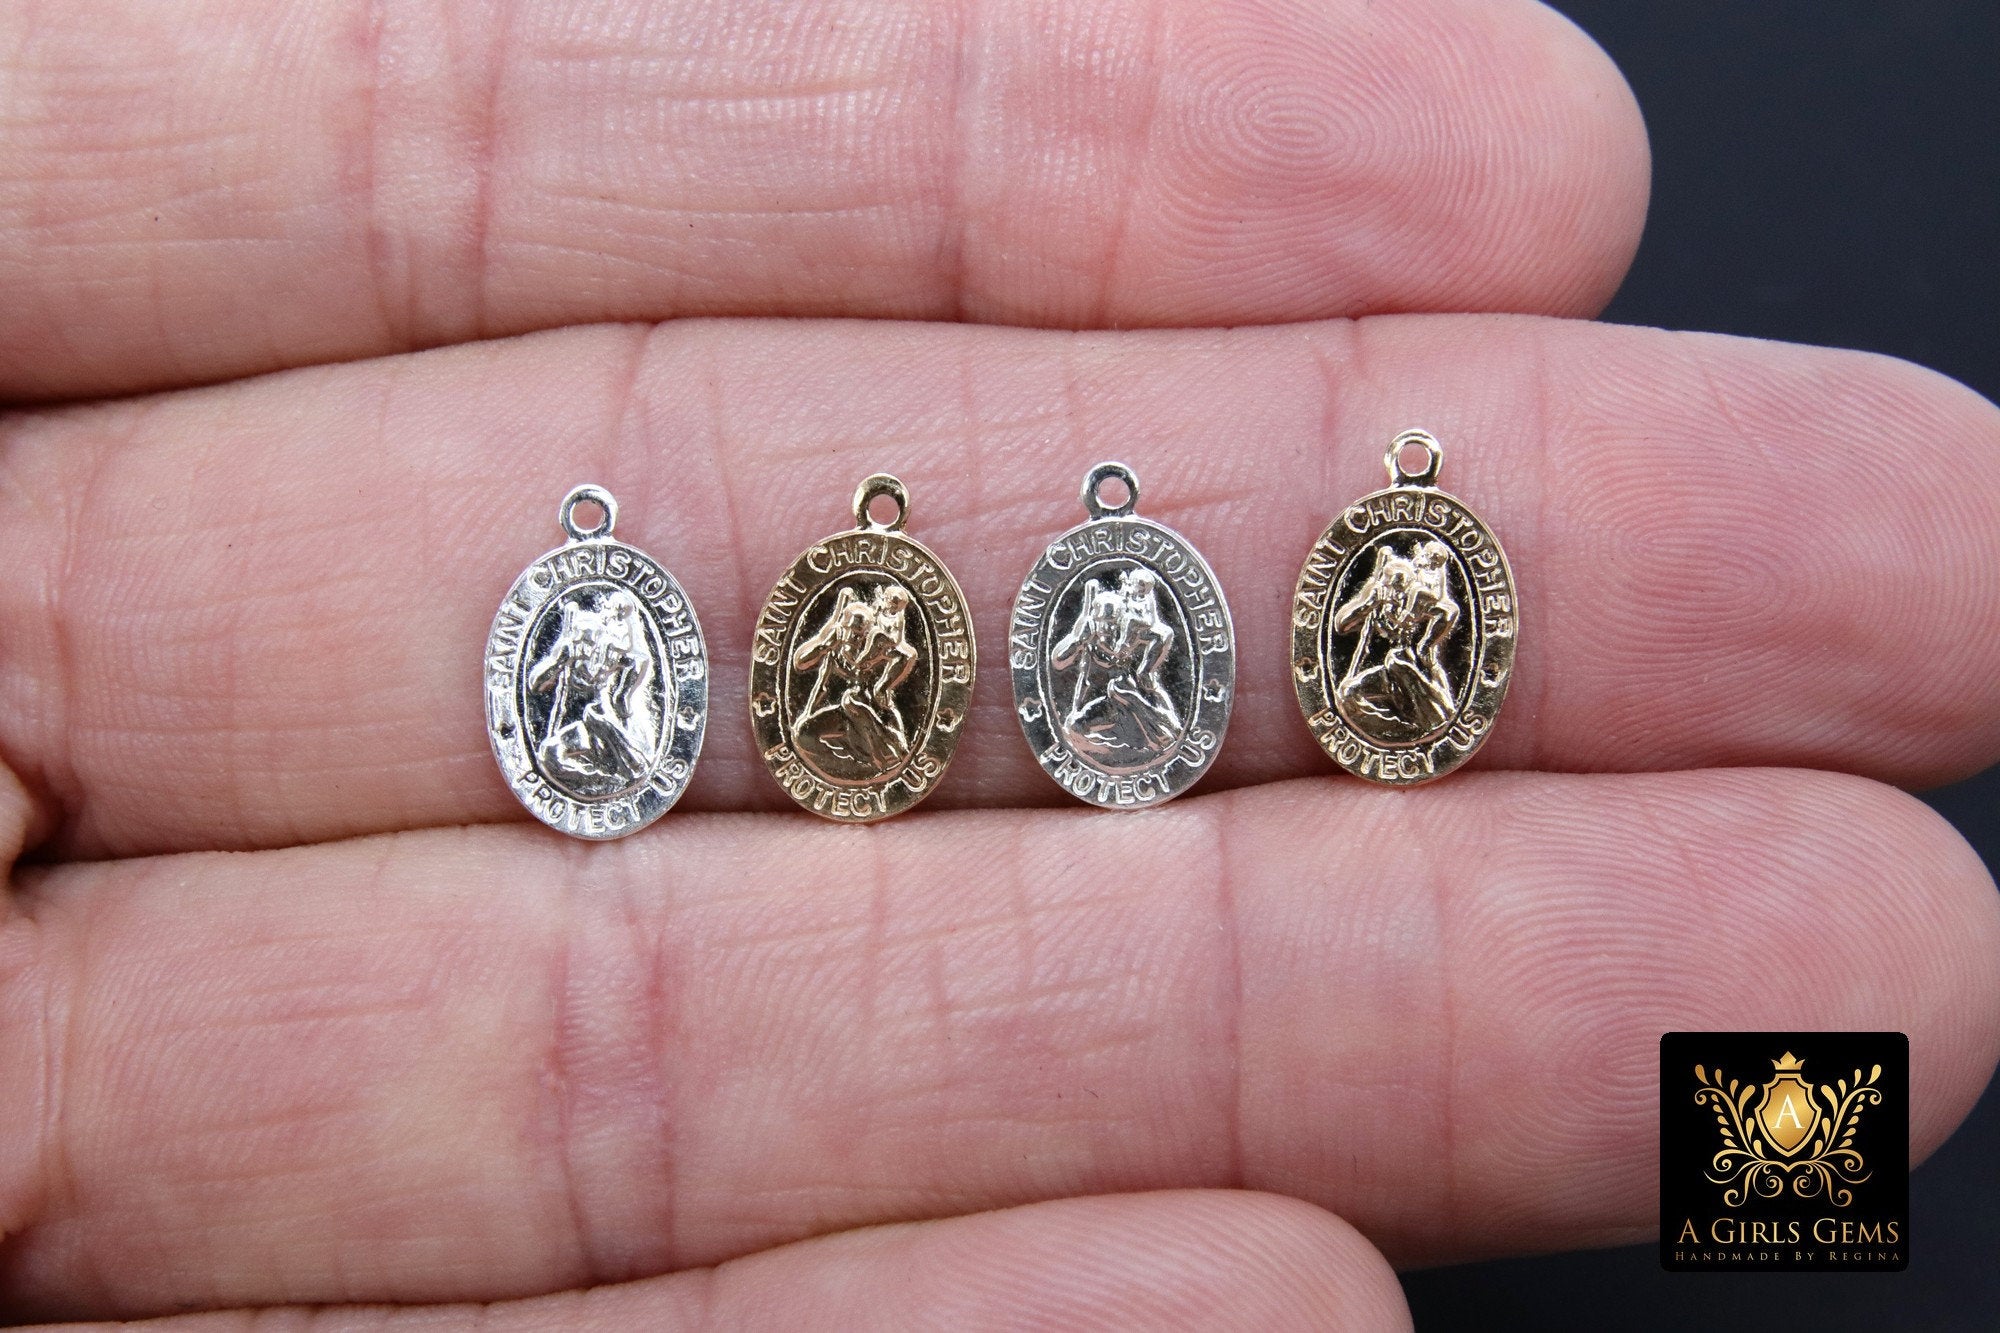 14 K Gold filled St Christopher Charm, Oval 925 Sterling Silver Religious Bracelet Medals #748, Protection Necklace